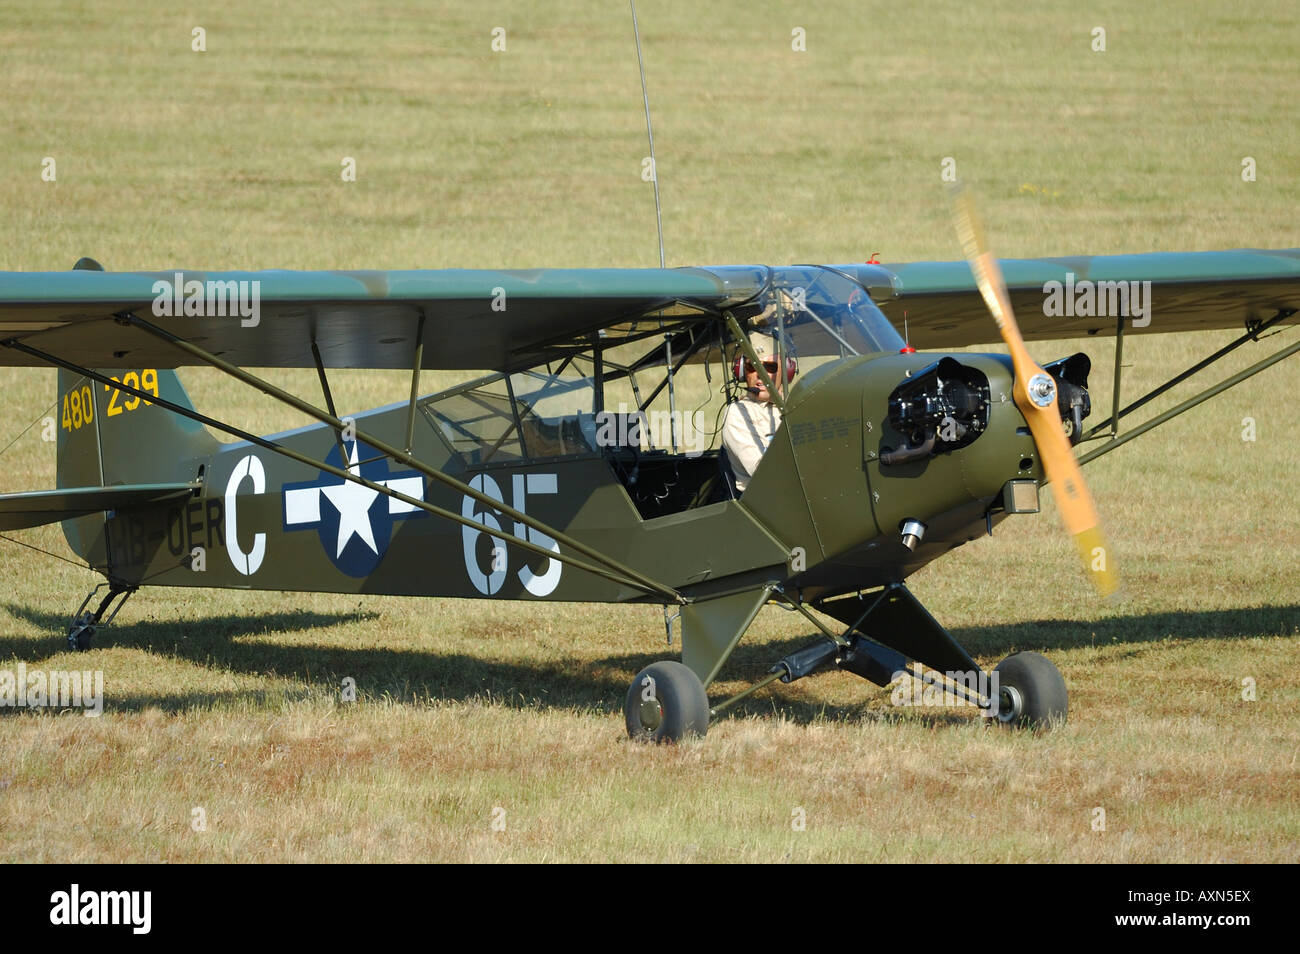 Old Piper J-3 Cub (L-4) plane used during WWII in Europe by us army. Stock Photo